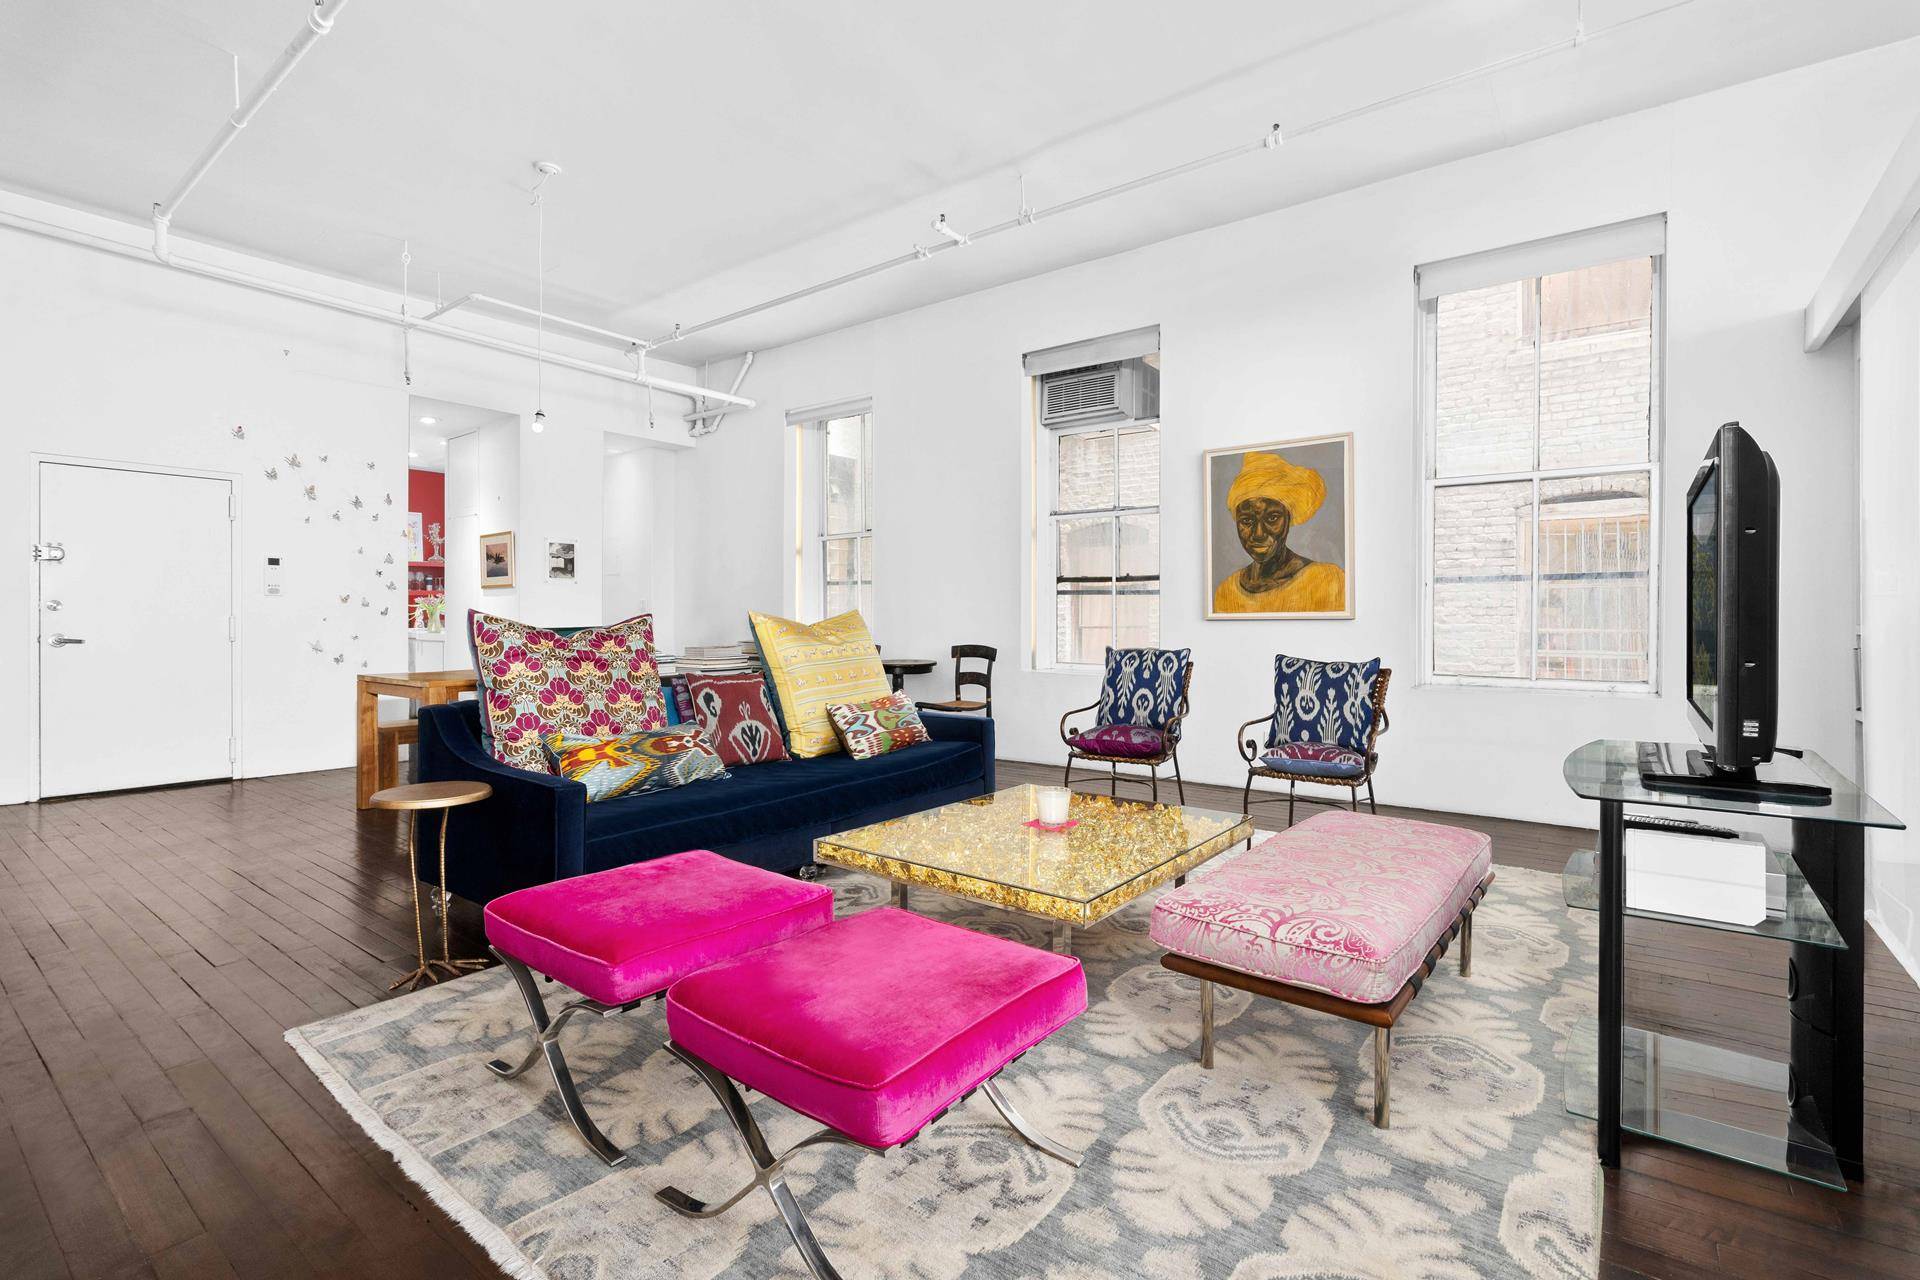 Located in one of SoHo's oldest and best cooperative buildings, this south and west facing spacious loft is quintessential downtown living in an iconic location.